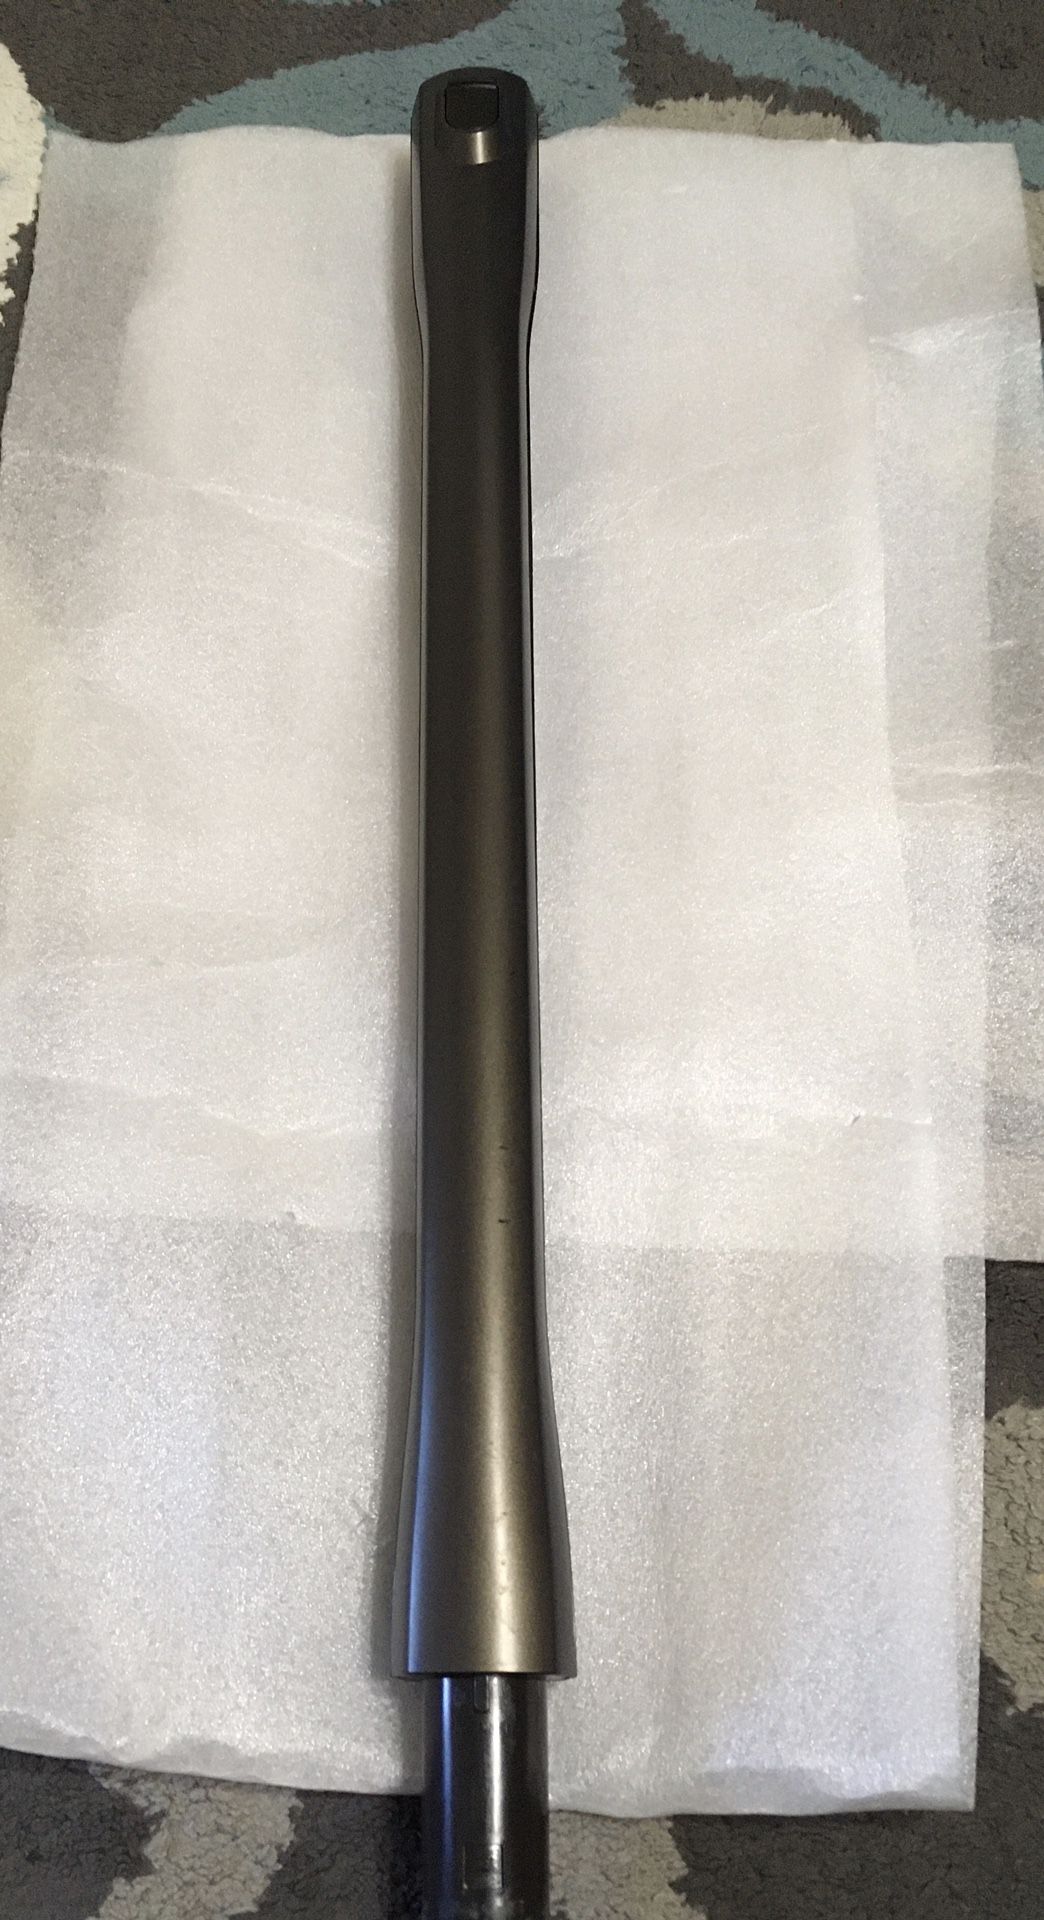 Miele Genuine Tube Wand Extension For Miele Triflex HX1  Pro SMUL0 Vacuum Cleaner  In used good condition . Cleaned in and out   Original Miele part 